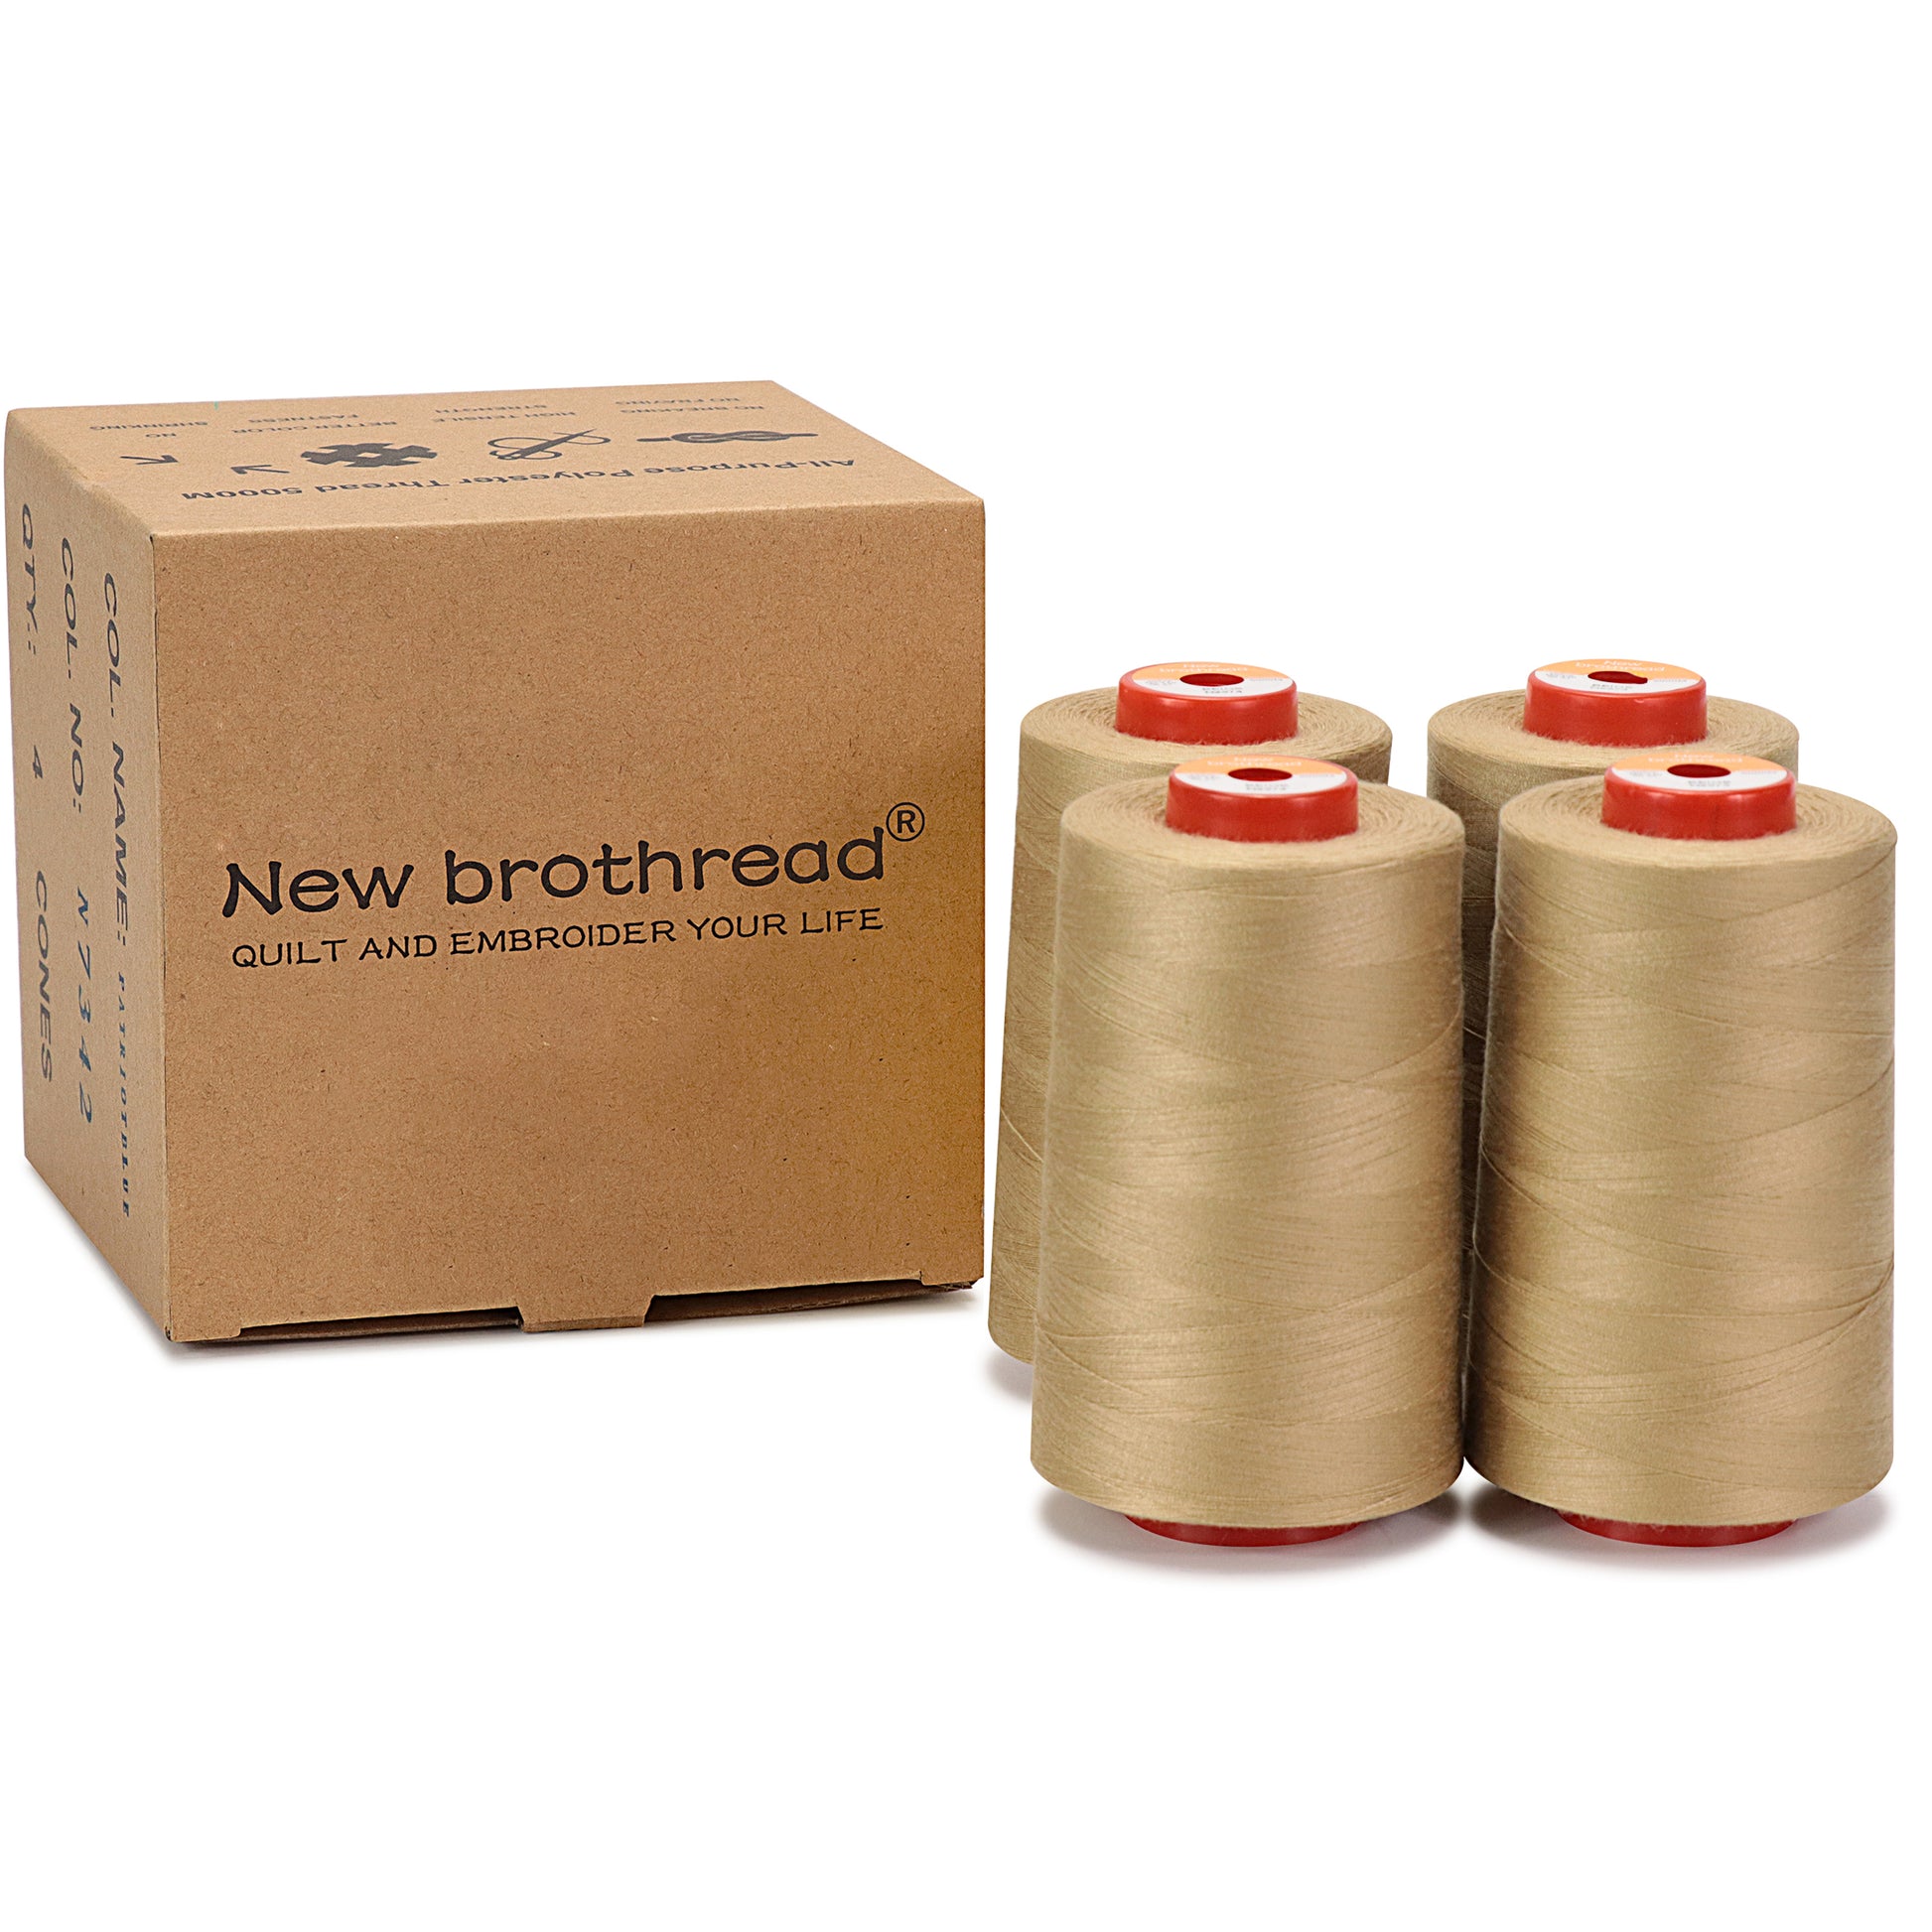 New brothreads - 40 Options- Various Assorted Color Packs of Polyester Embroidery Machine Thread Huge Spool 5000m for All Embroidery Machines